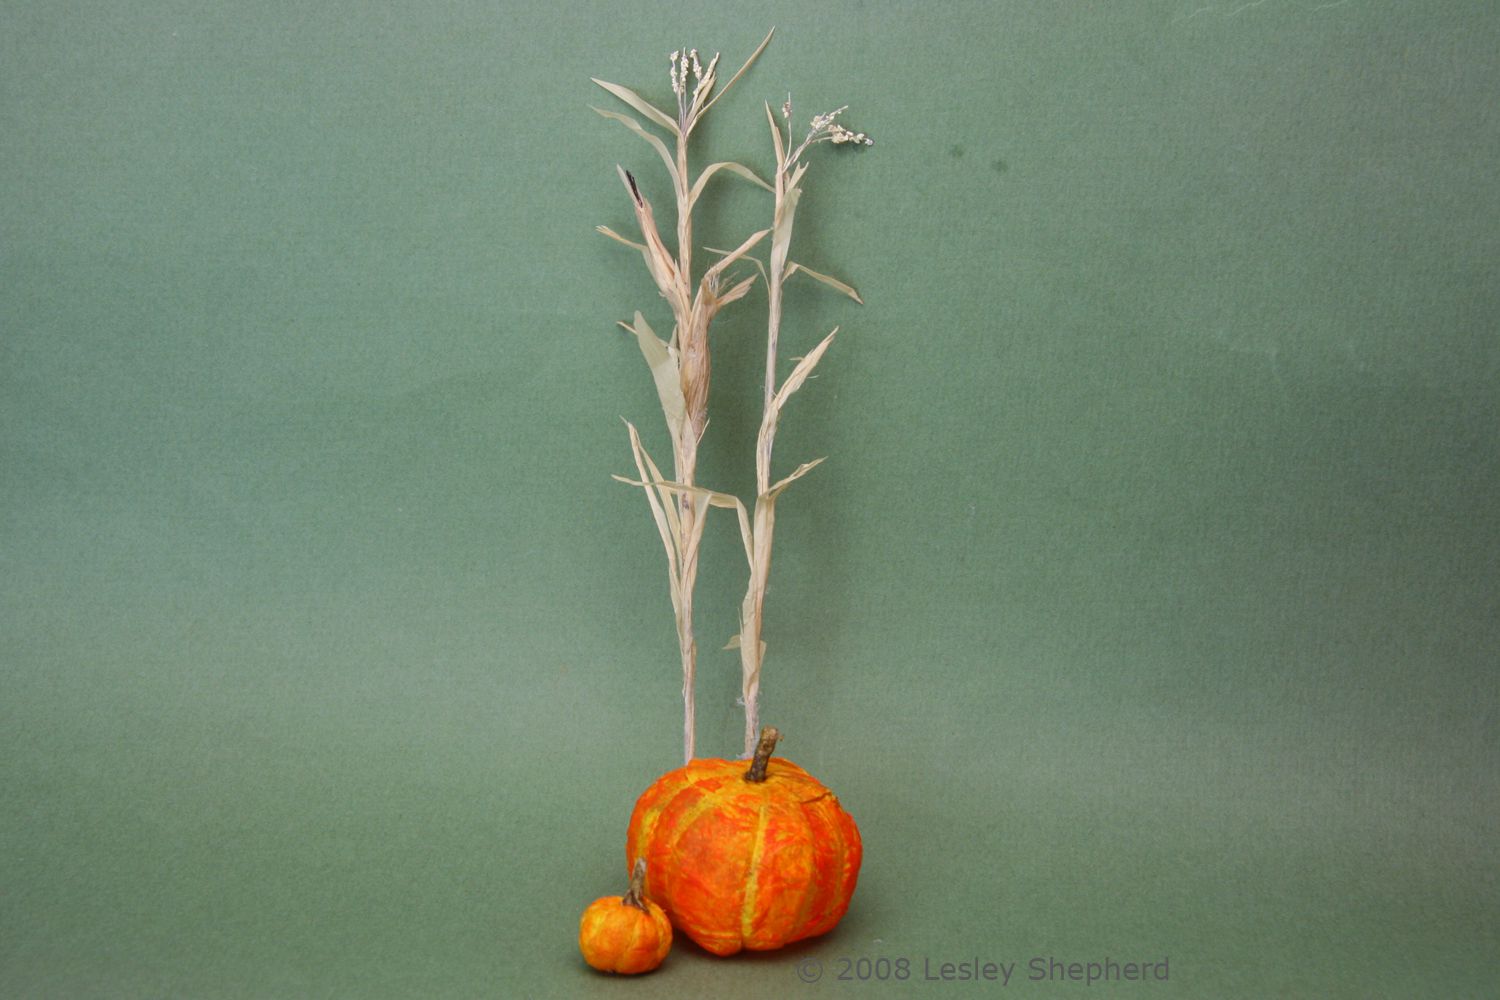 Dried corn stalks and miniature pumpkins ready for a dolls house display.